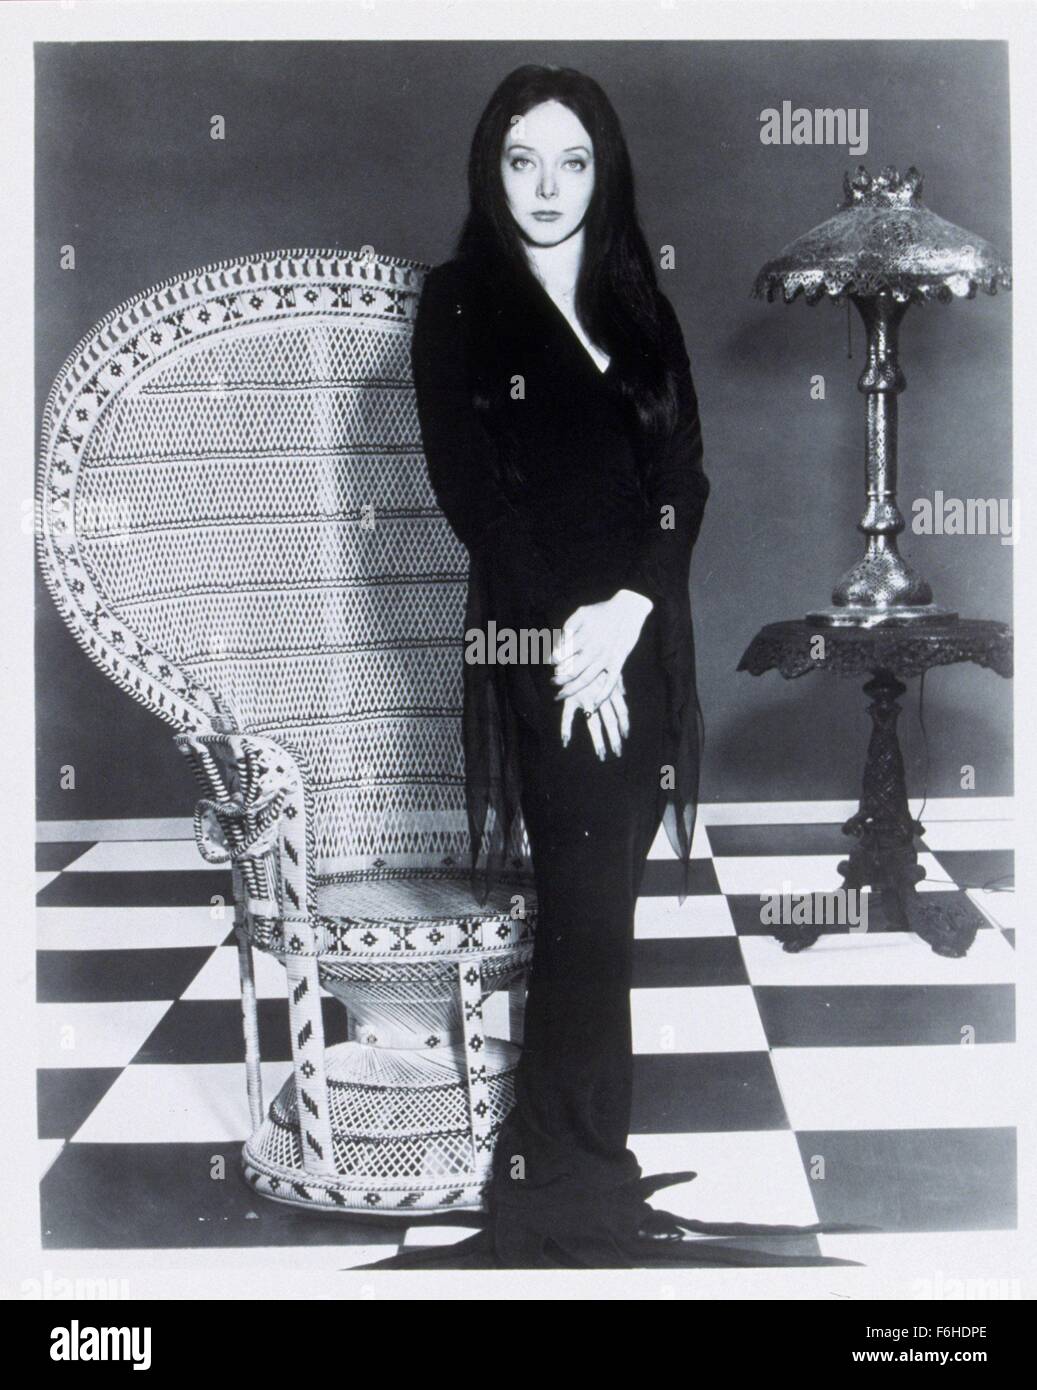 Morticia frump addams High Resolution Stock Photography and Images - Alamy